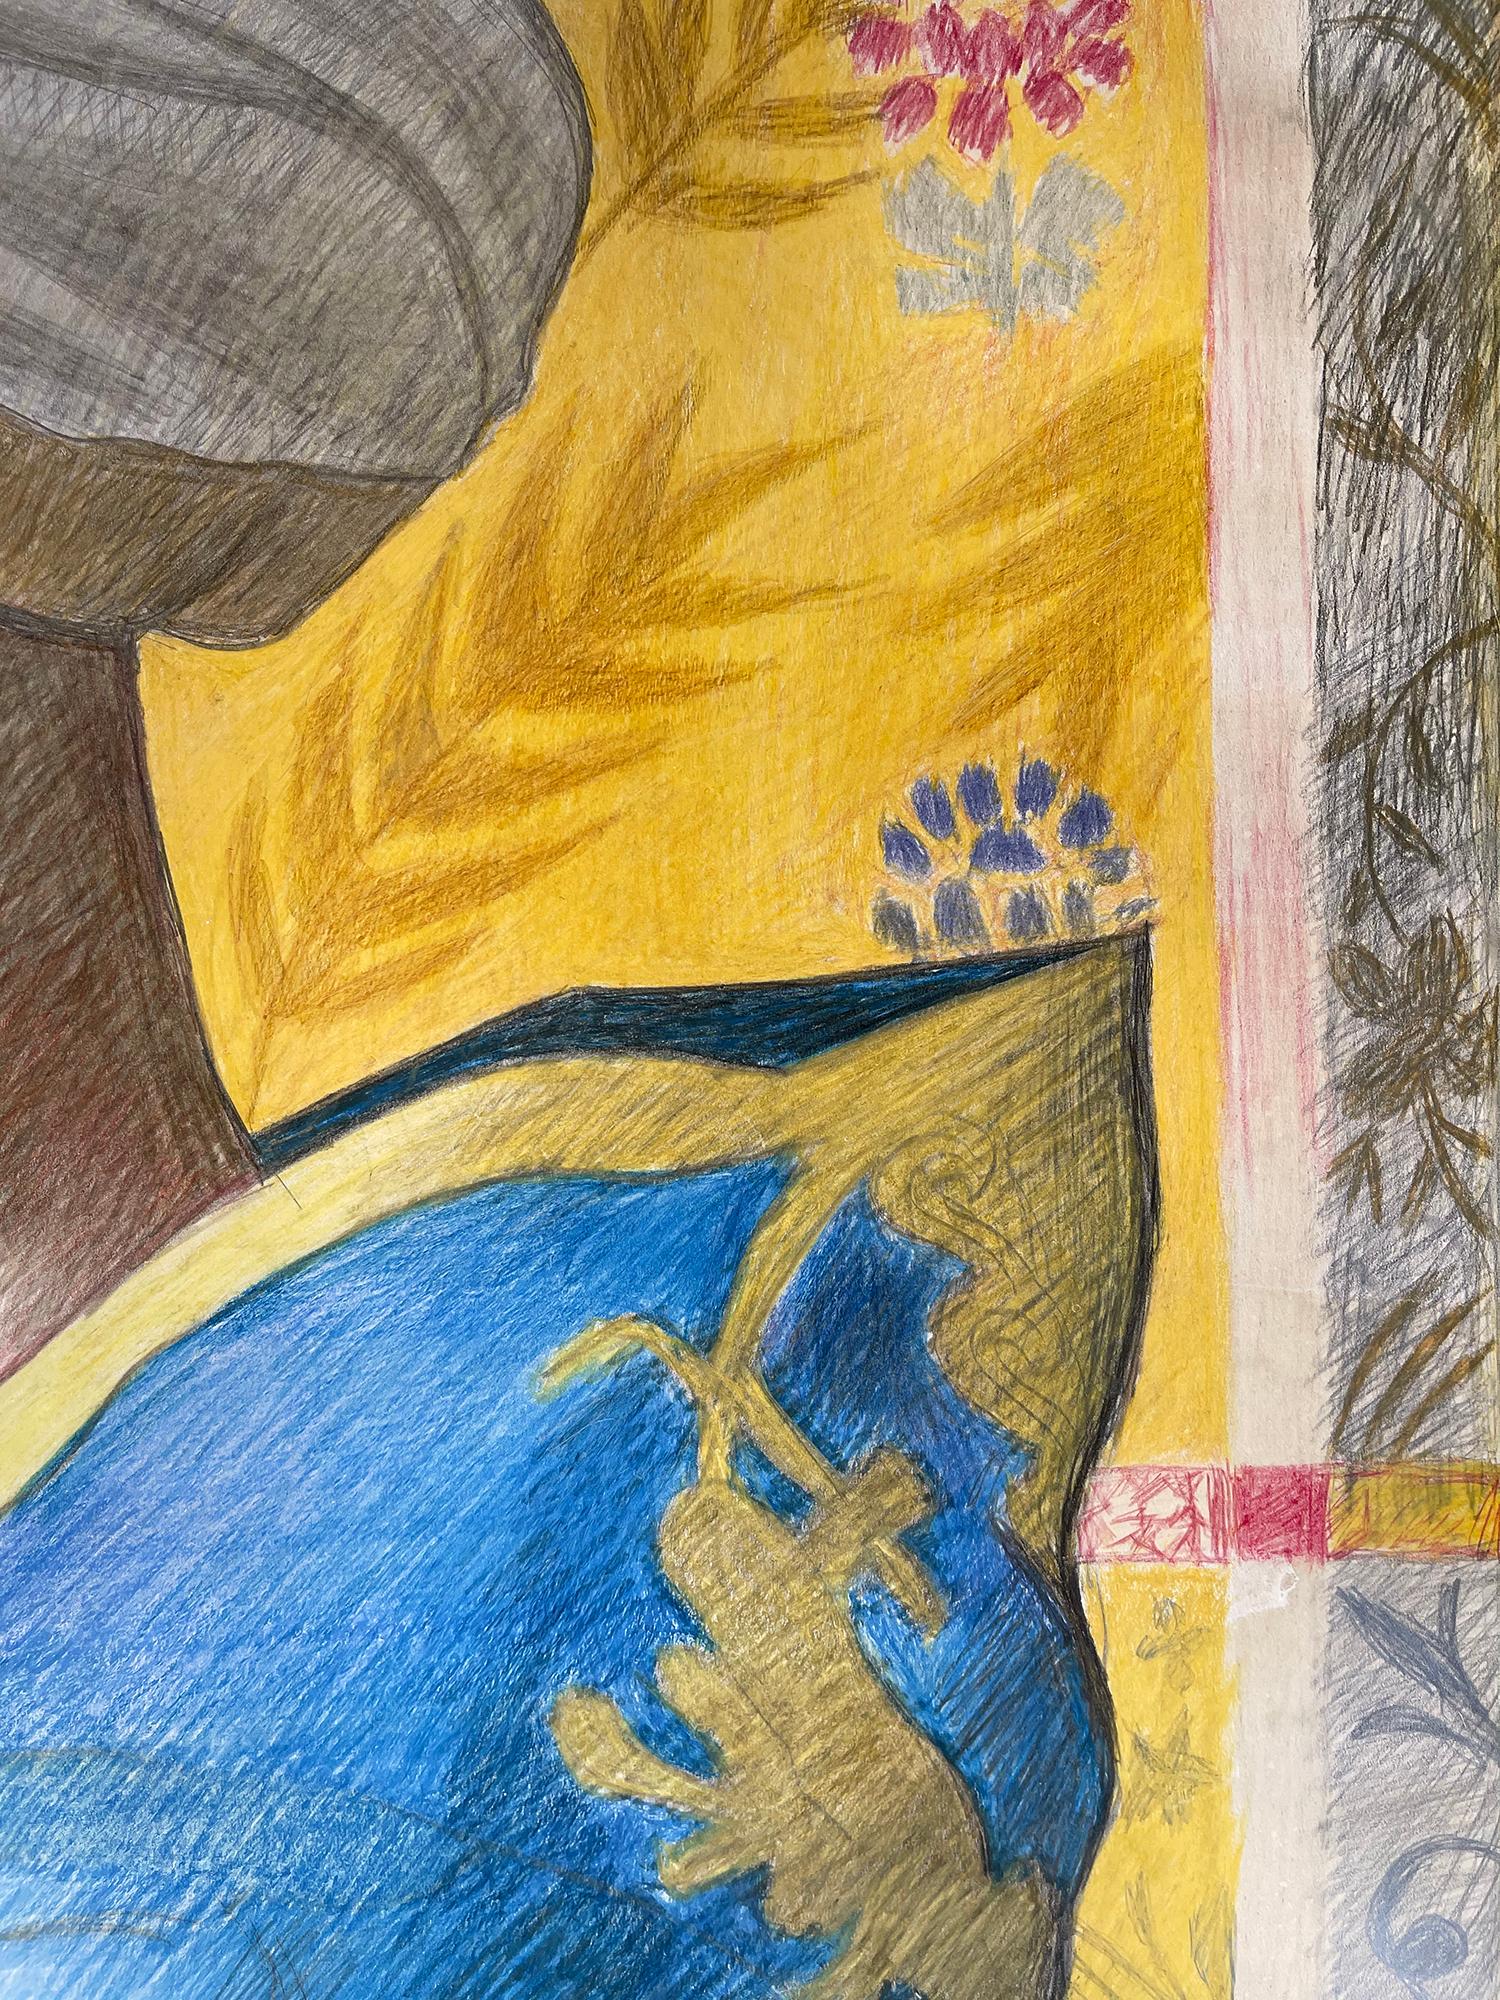 Portrait in primary blues and yellow of perhaps a Persian man.  He is in profile set against a decorative yellow background with floral elements.  The work was done two years before the artist's death but incorporated many graphic elements of some